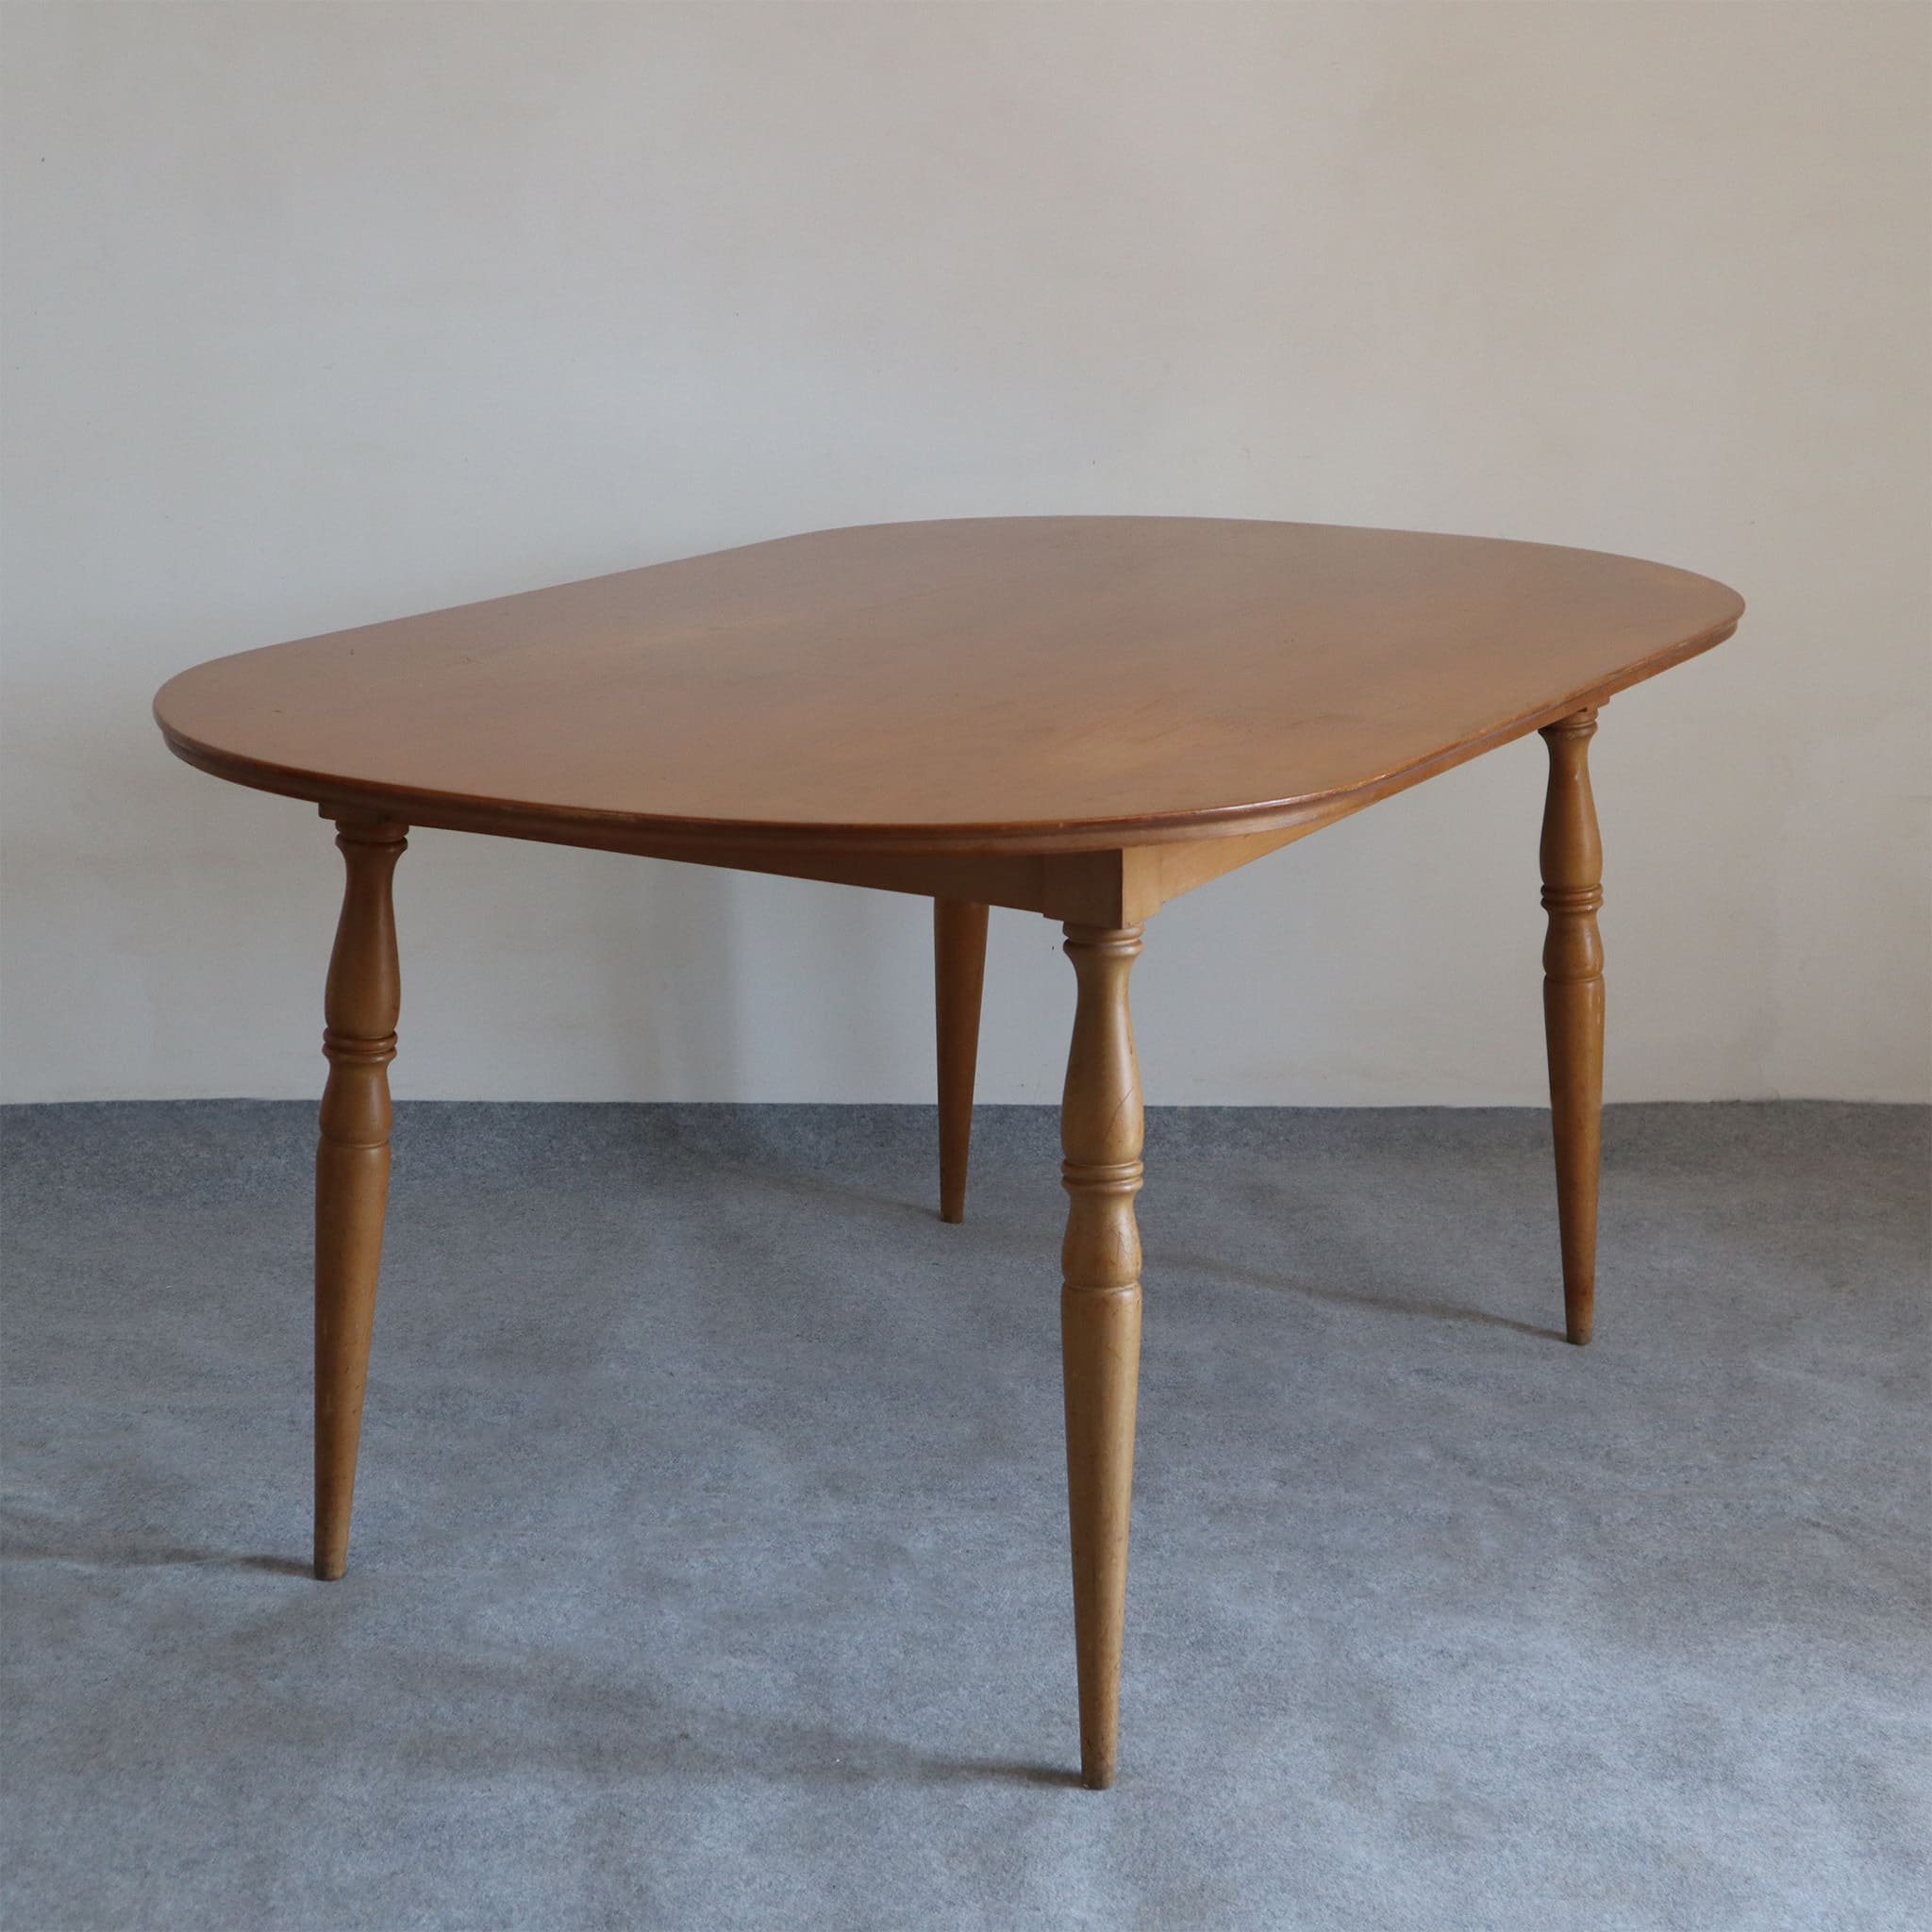 visionidepoca-modern-antique-vintage-60s-table-isa-bergamo-in-solid-beech-wood-with-plate-view-top